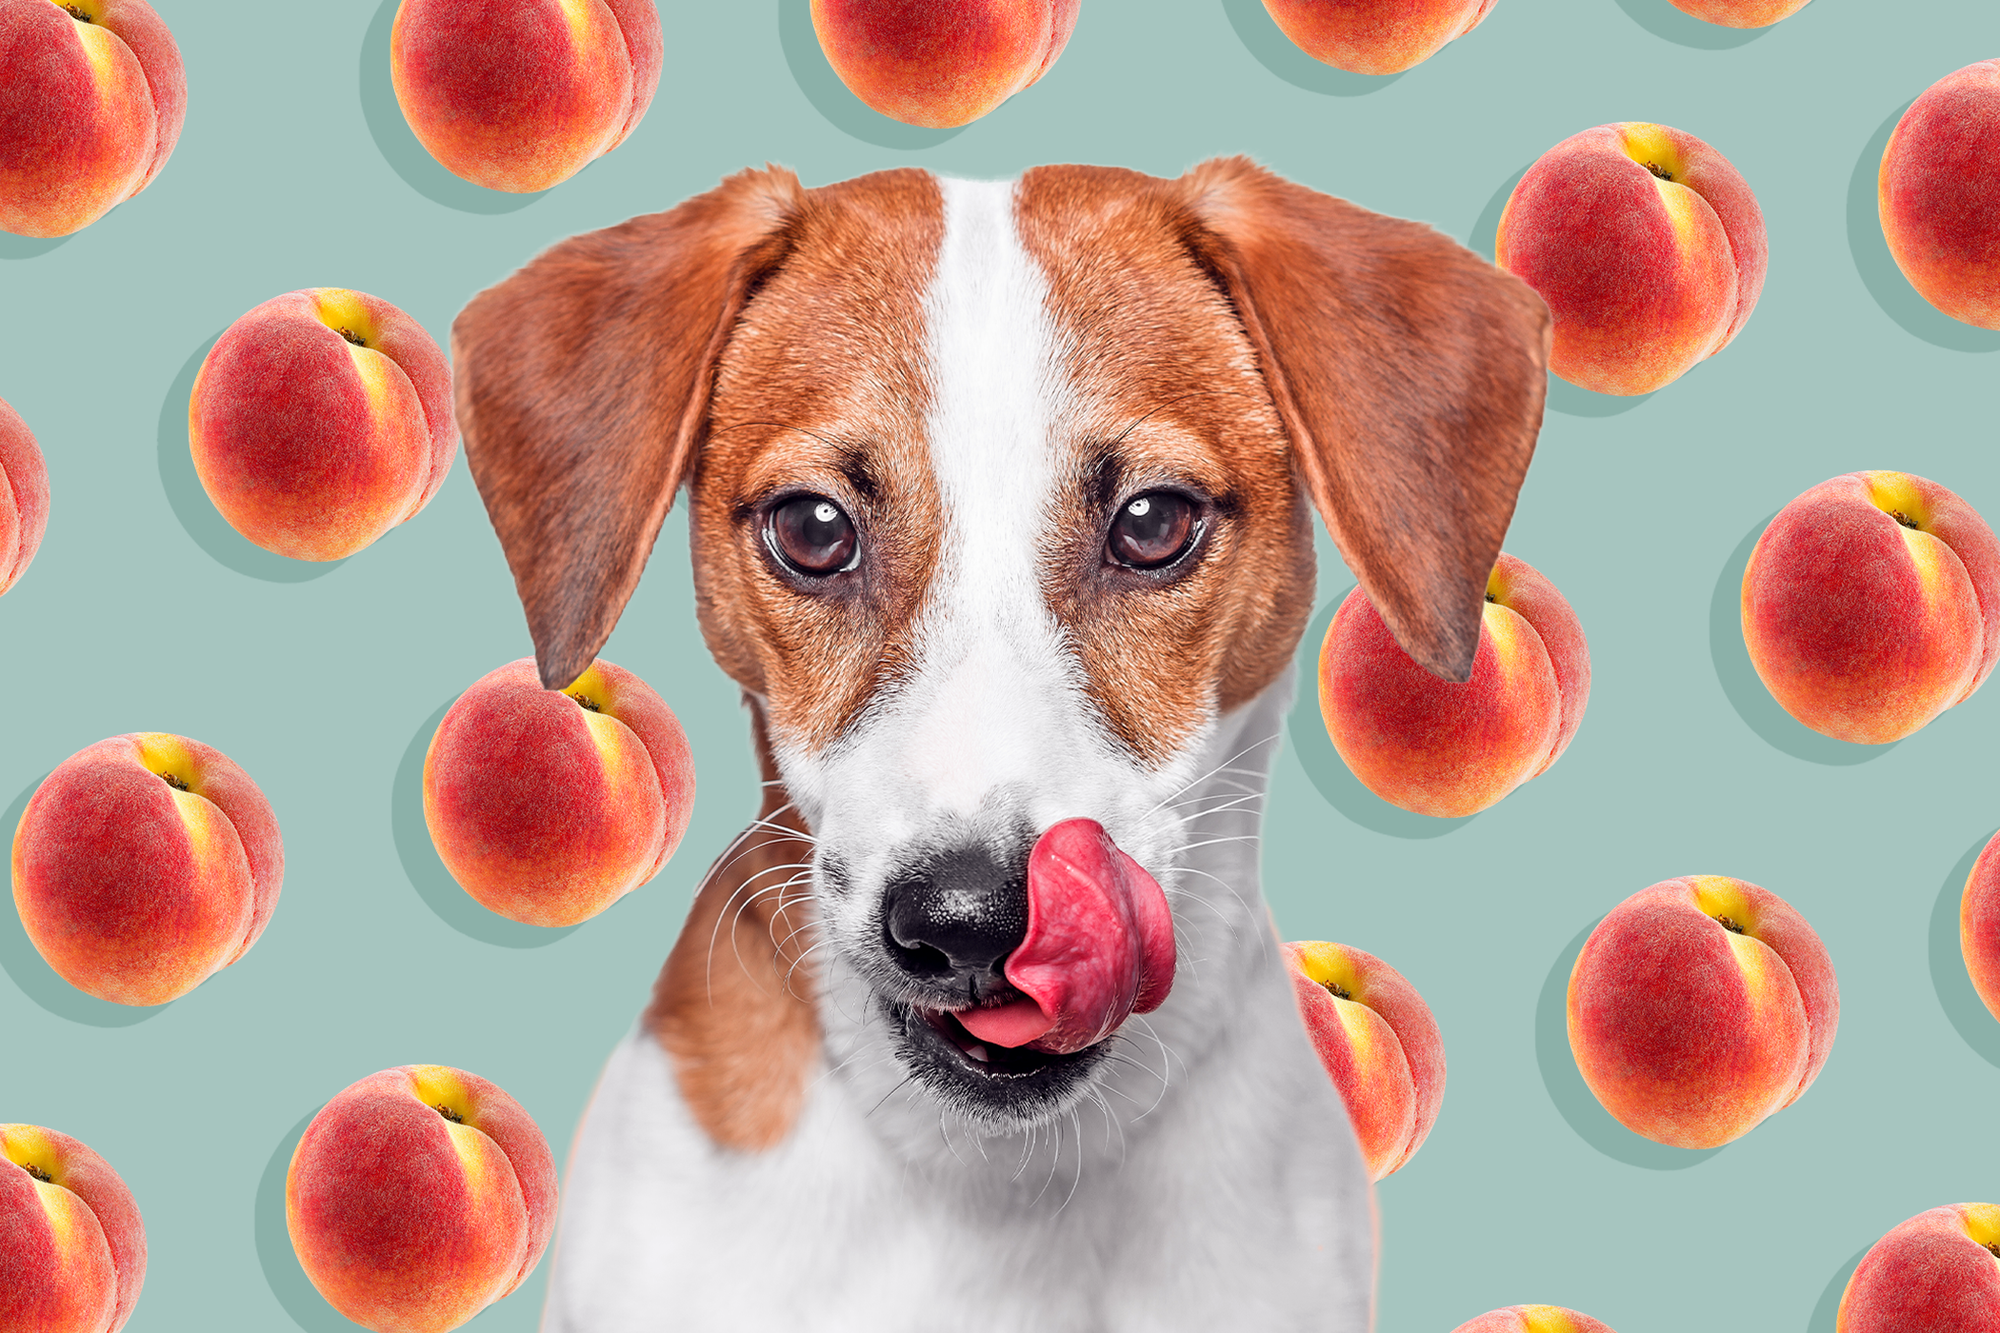 Can Dogs Eat Peaches? Here's What You Should Know